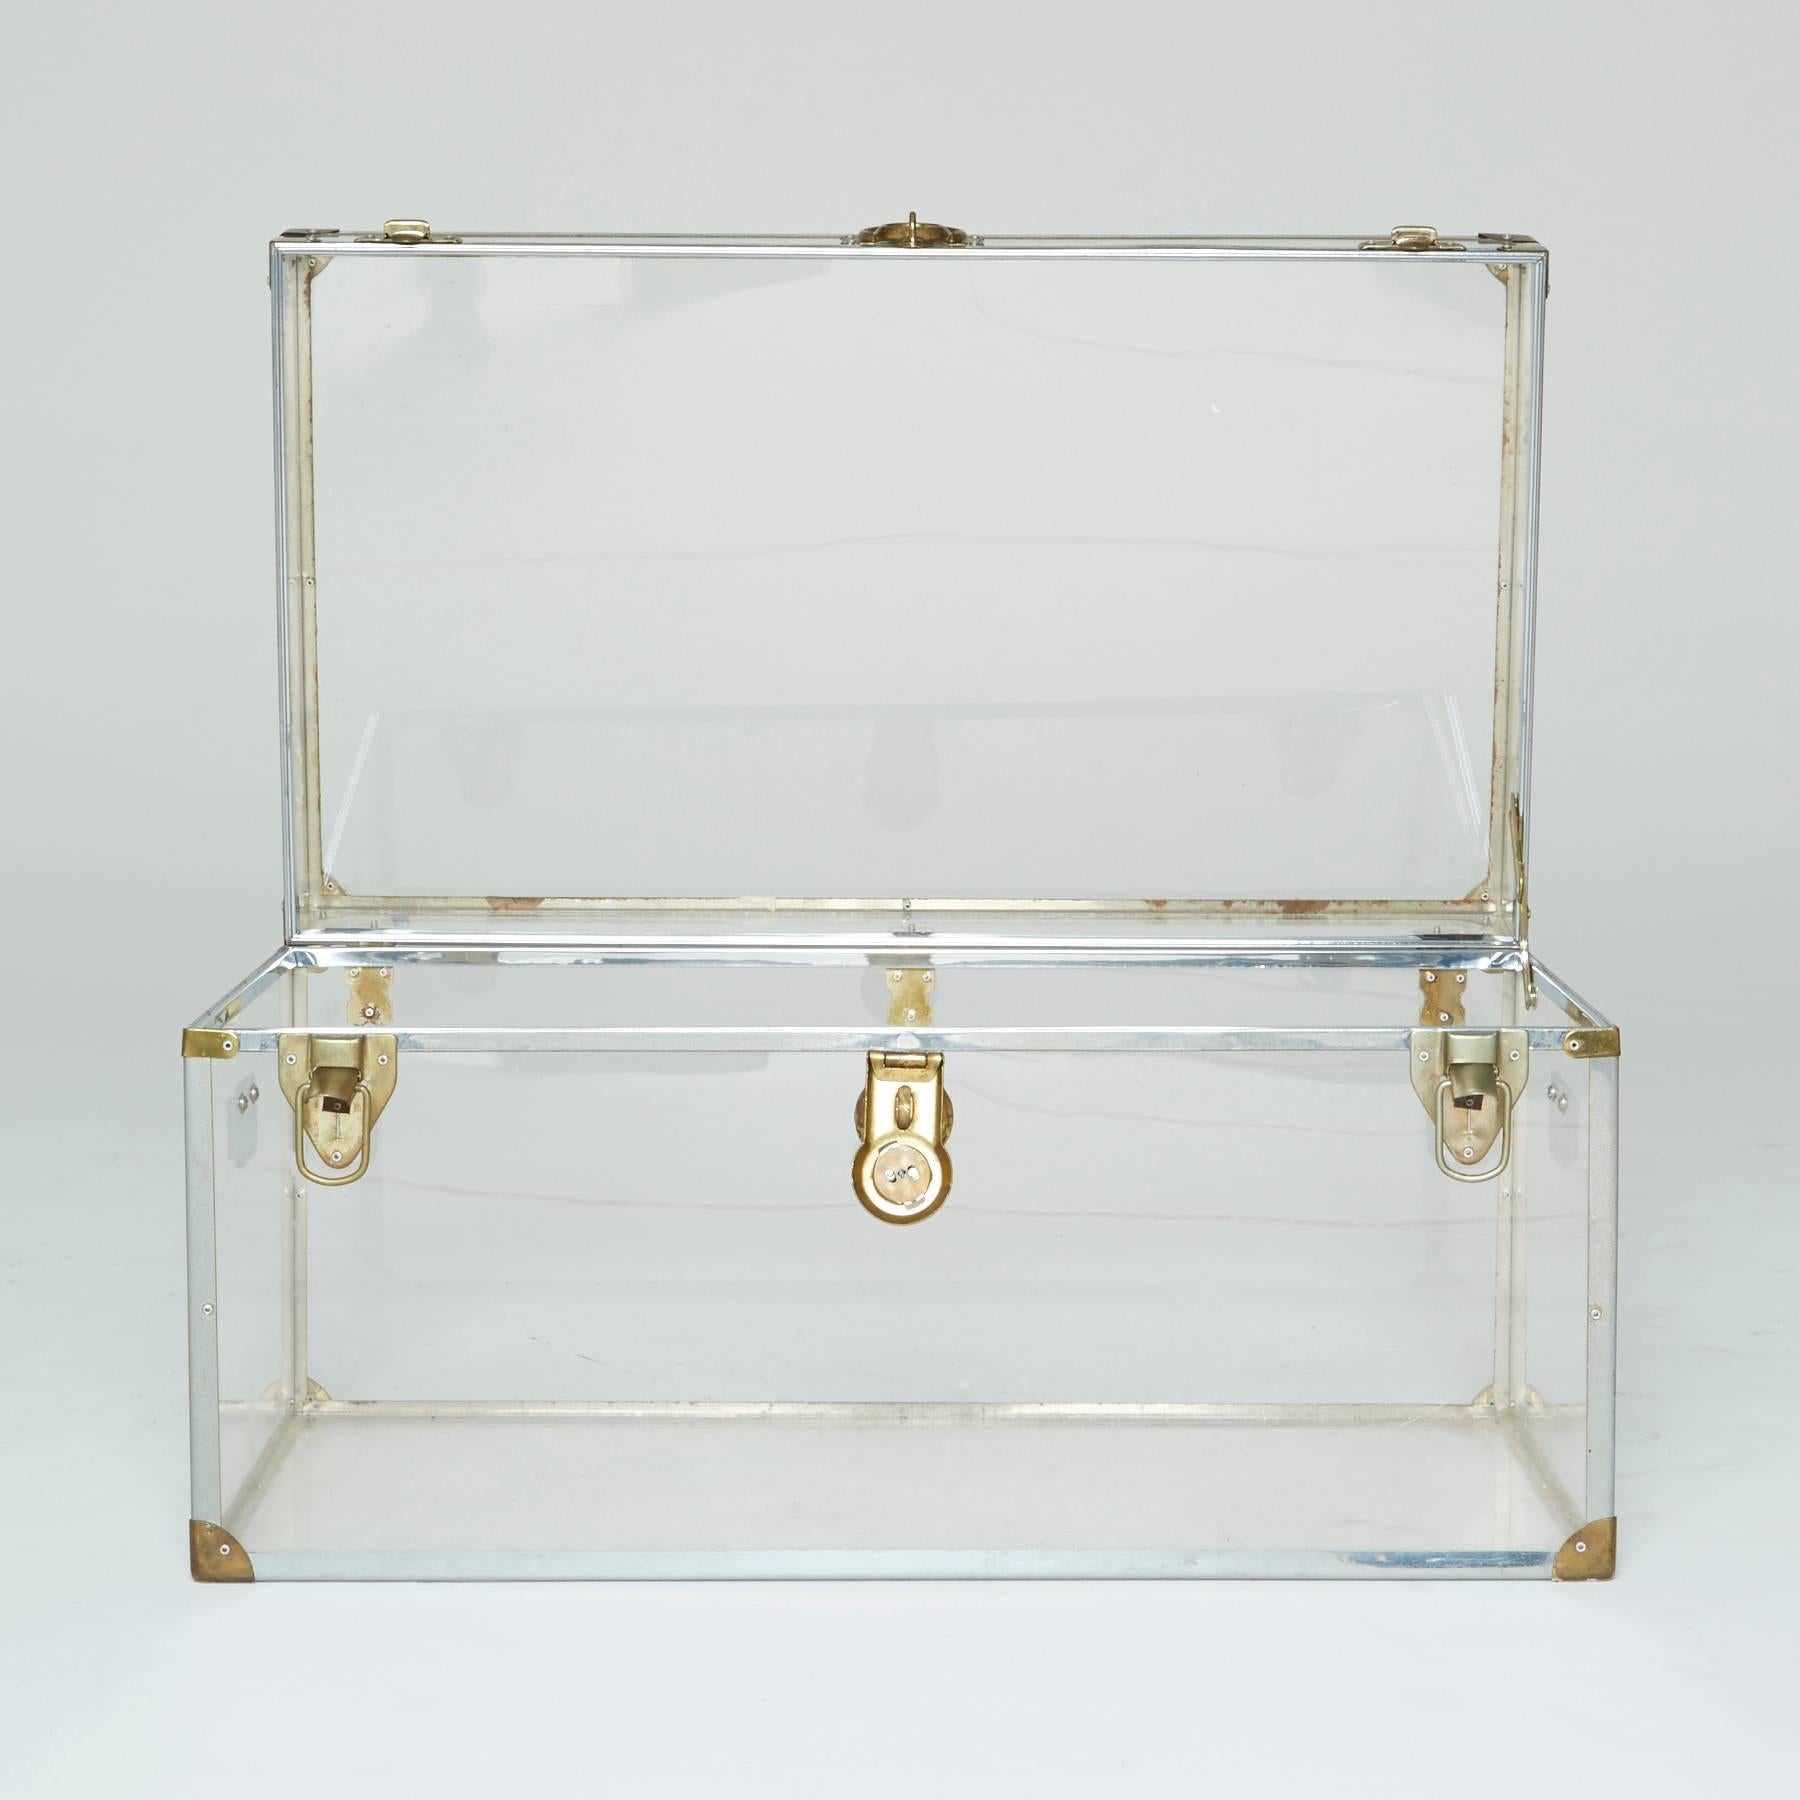 It just doesn't get any cooler than this vintage Lucite trunk. Brass hardware ornaments the corners, provides handles on the sides, and a three locking clasps on across the front. The trunk hails from the transparent trends of the 1960s and 1970s,